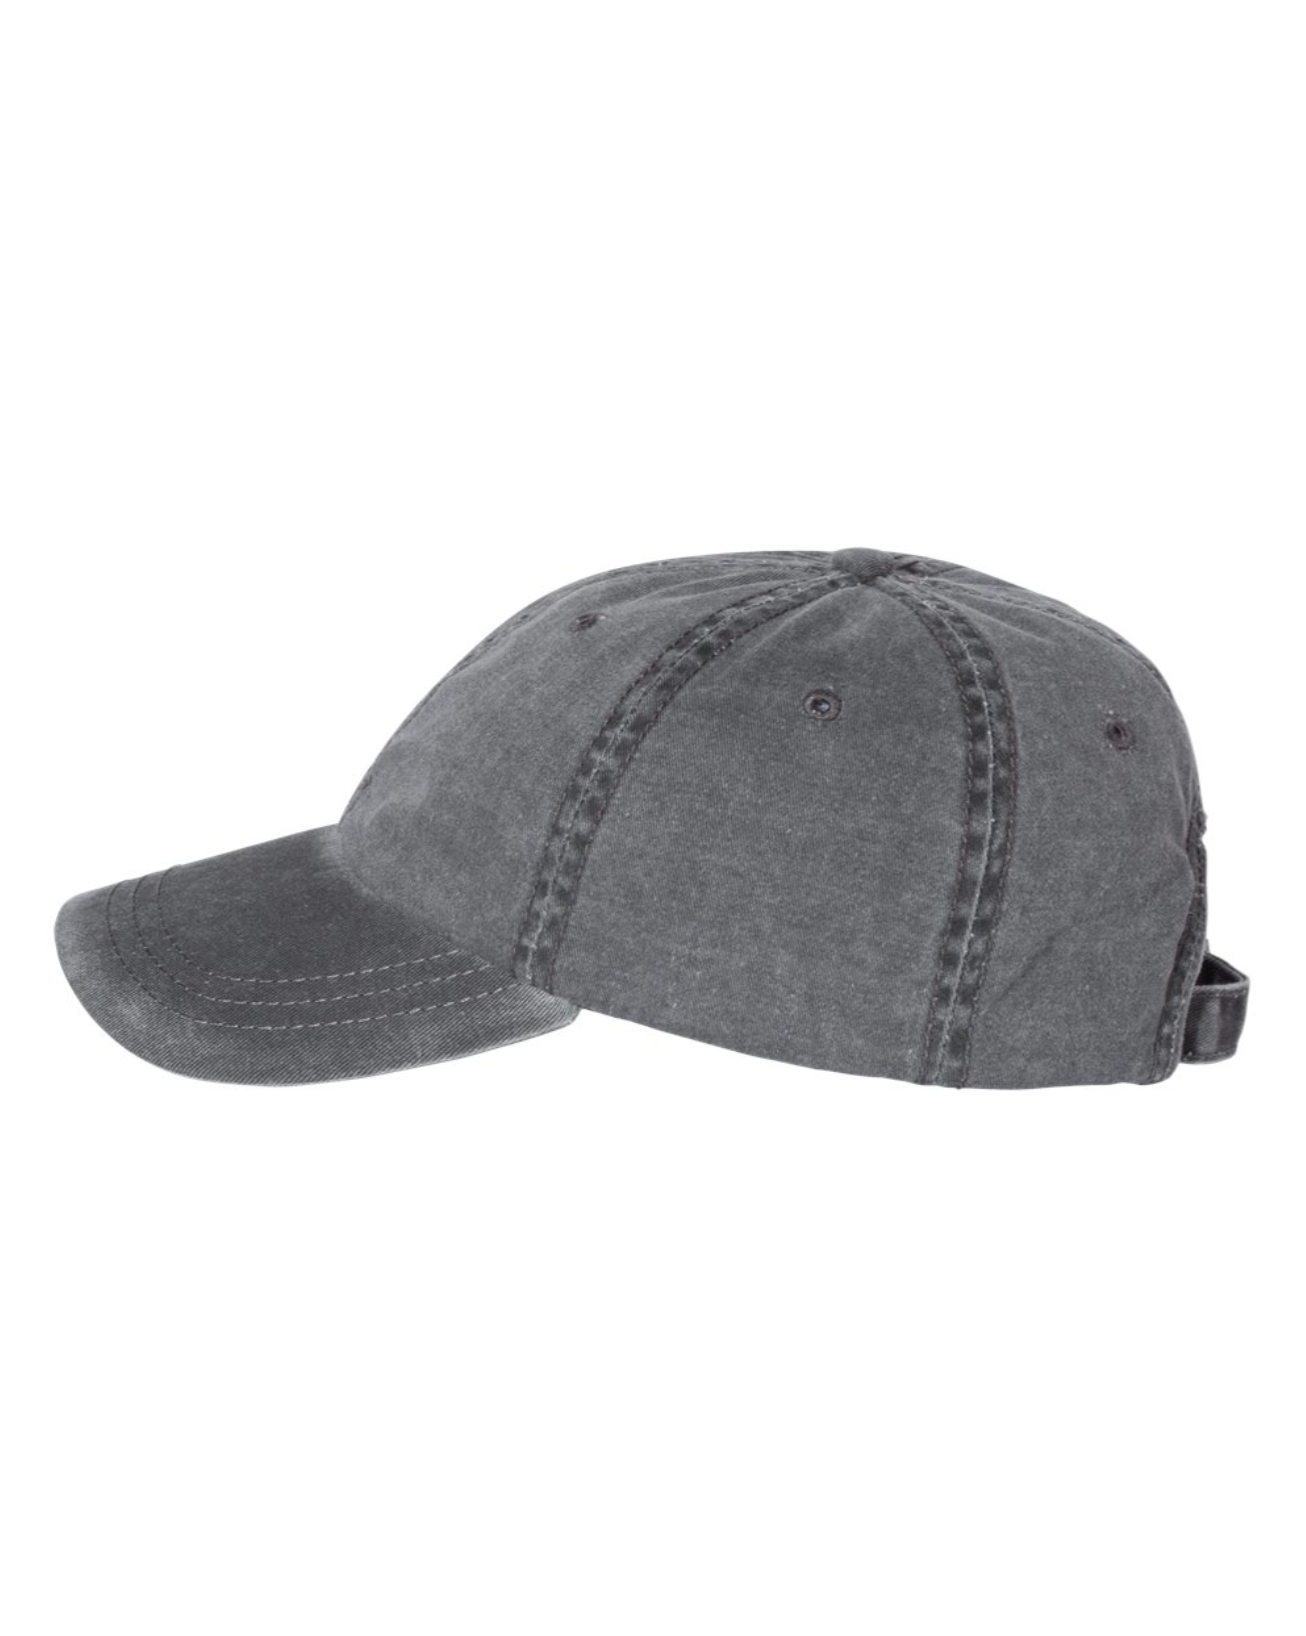 Low Energy Leads - Growthtrackers Hat